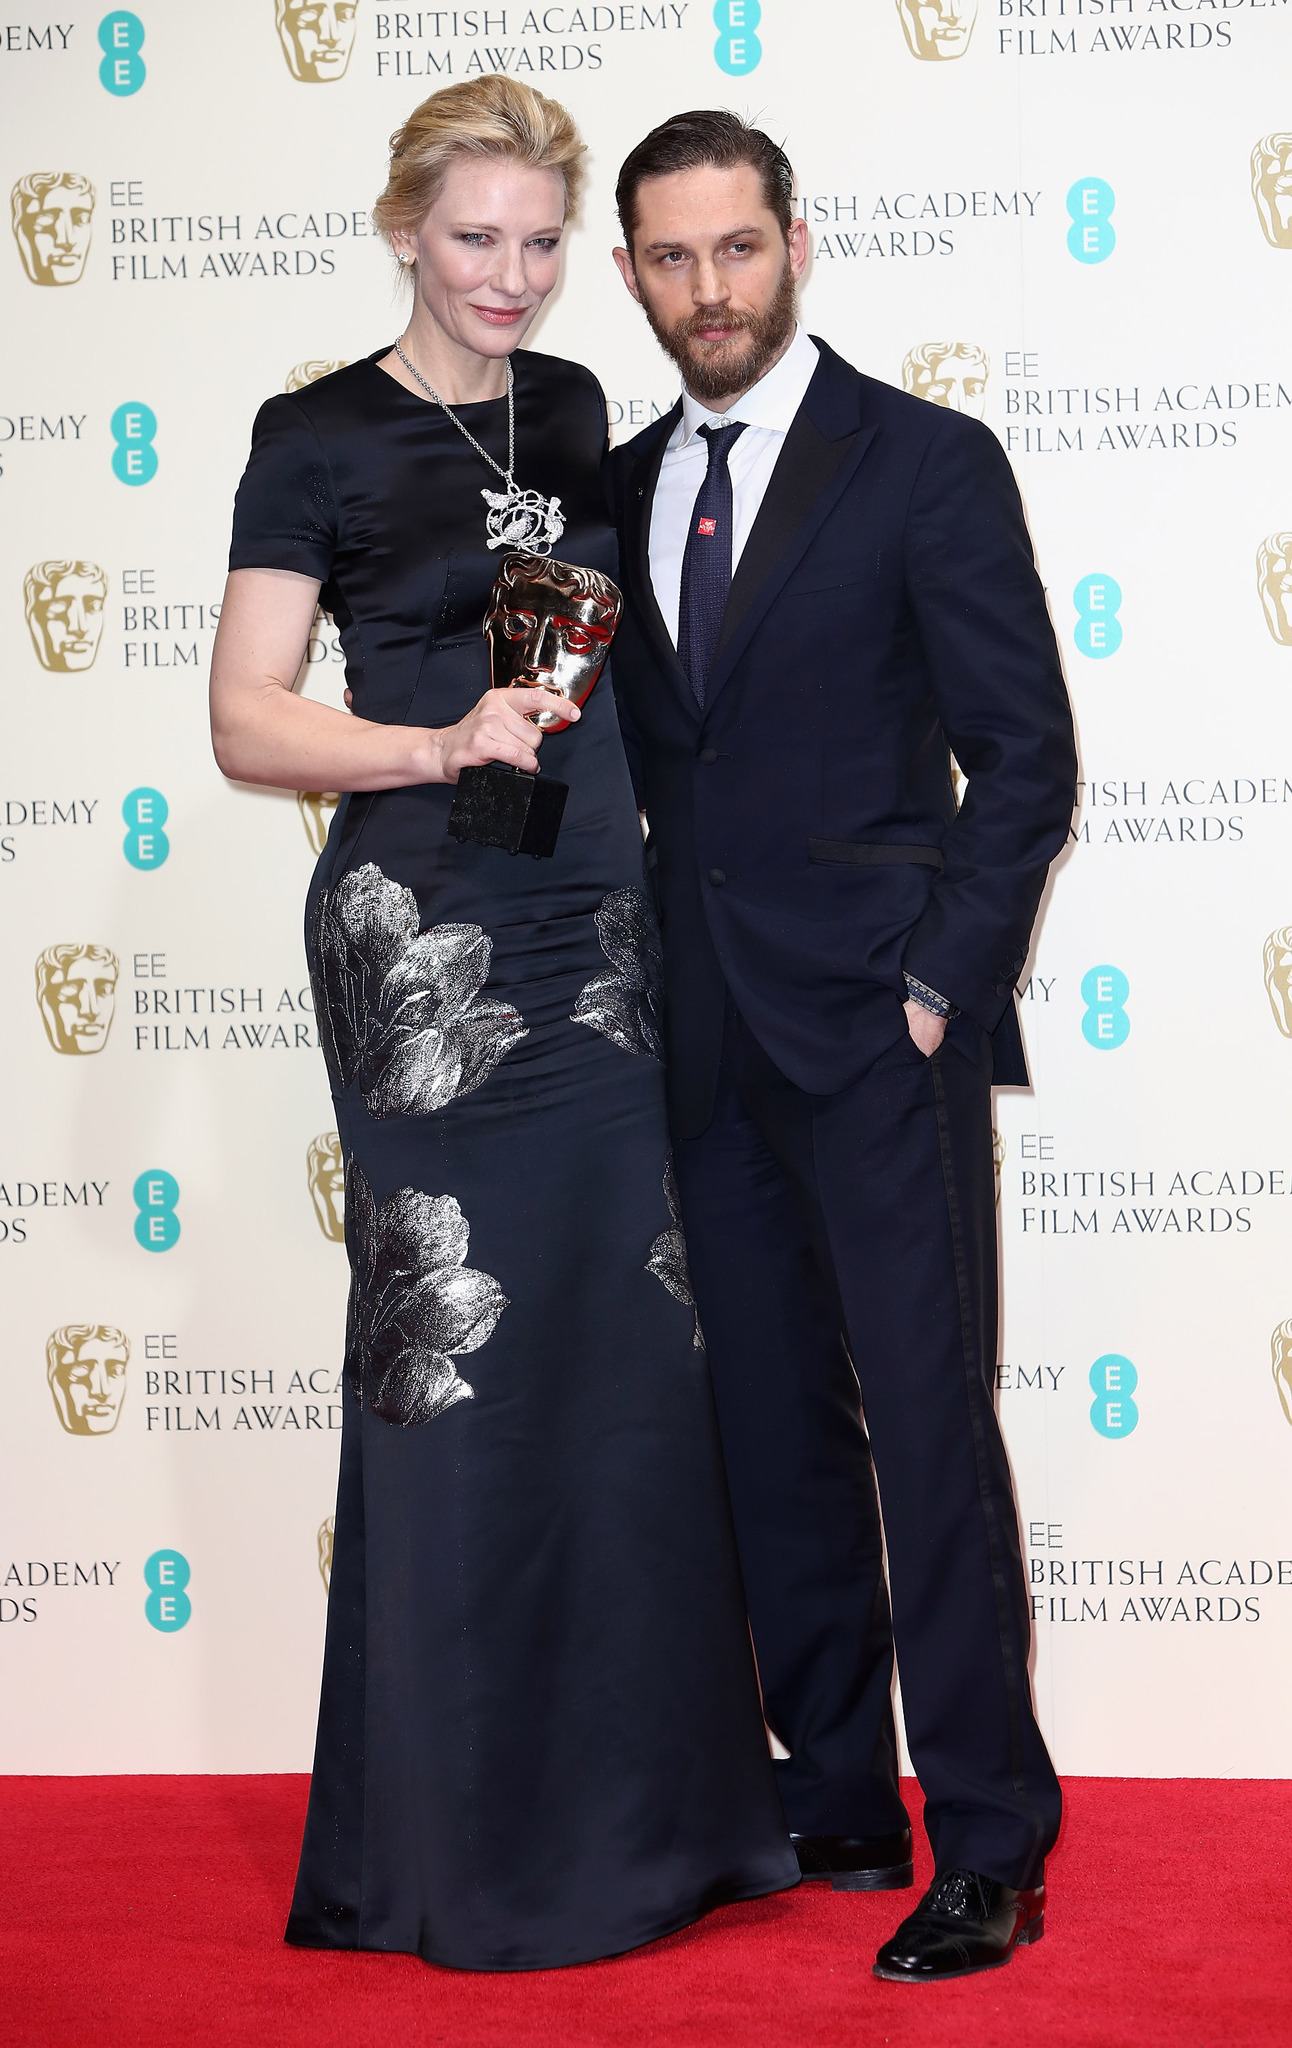 Cate Blanchett and Tom Hardy